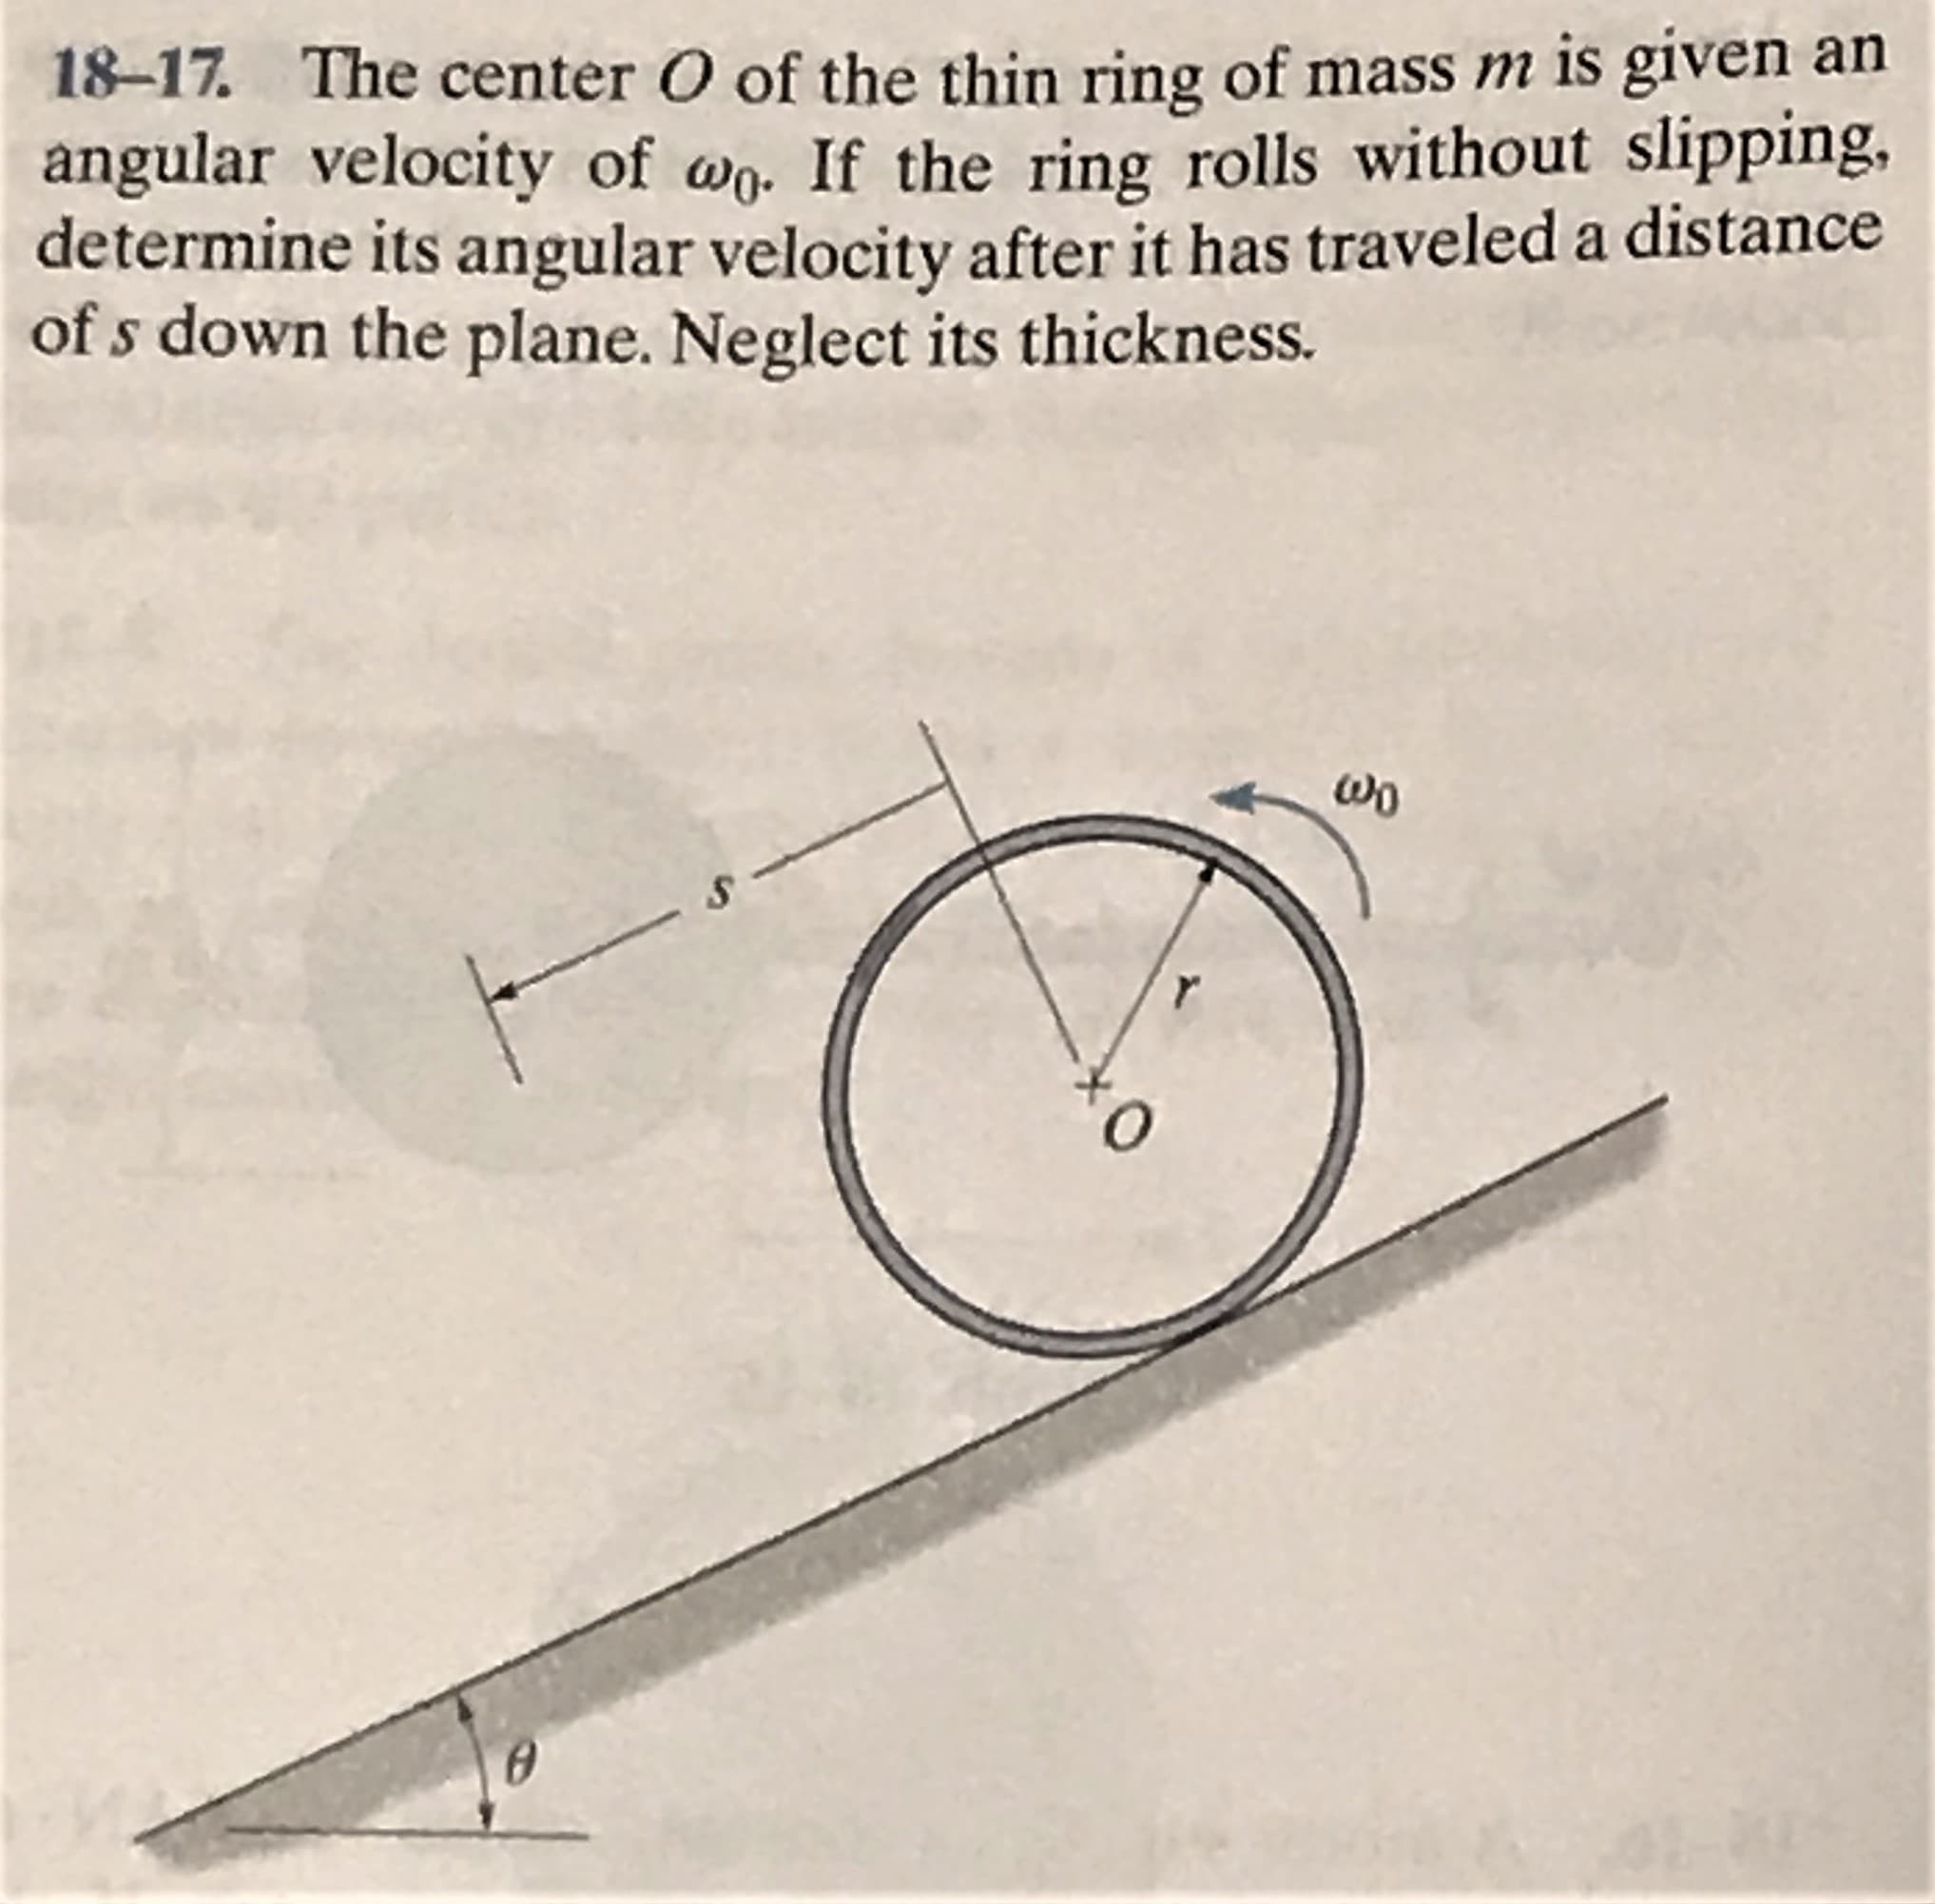 18–17. The center O of the thin ring of mass m is given an
angular velocity of wo. If the ring rolls without slipping,
determine its angular velocity after it has traveled a distance
of s down the plane. Neglect its thickness.
